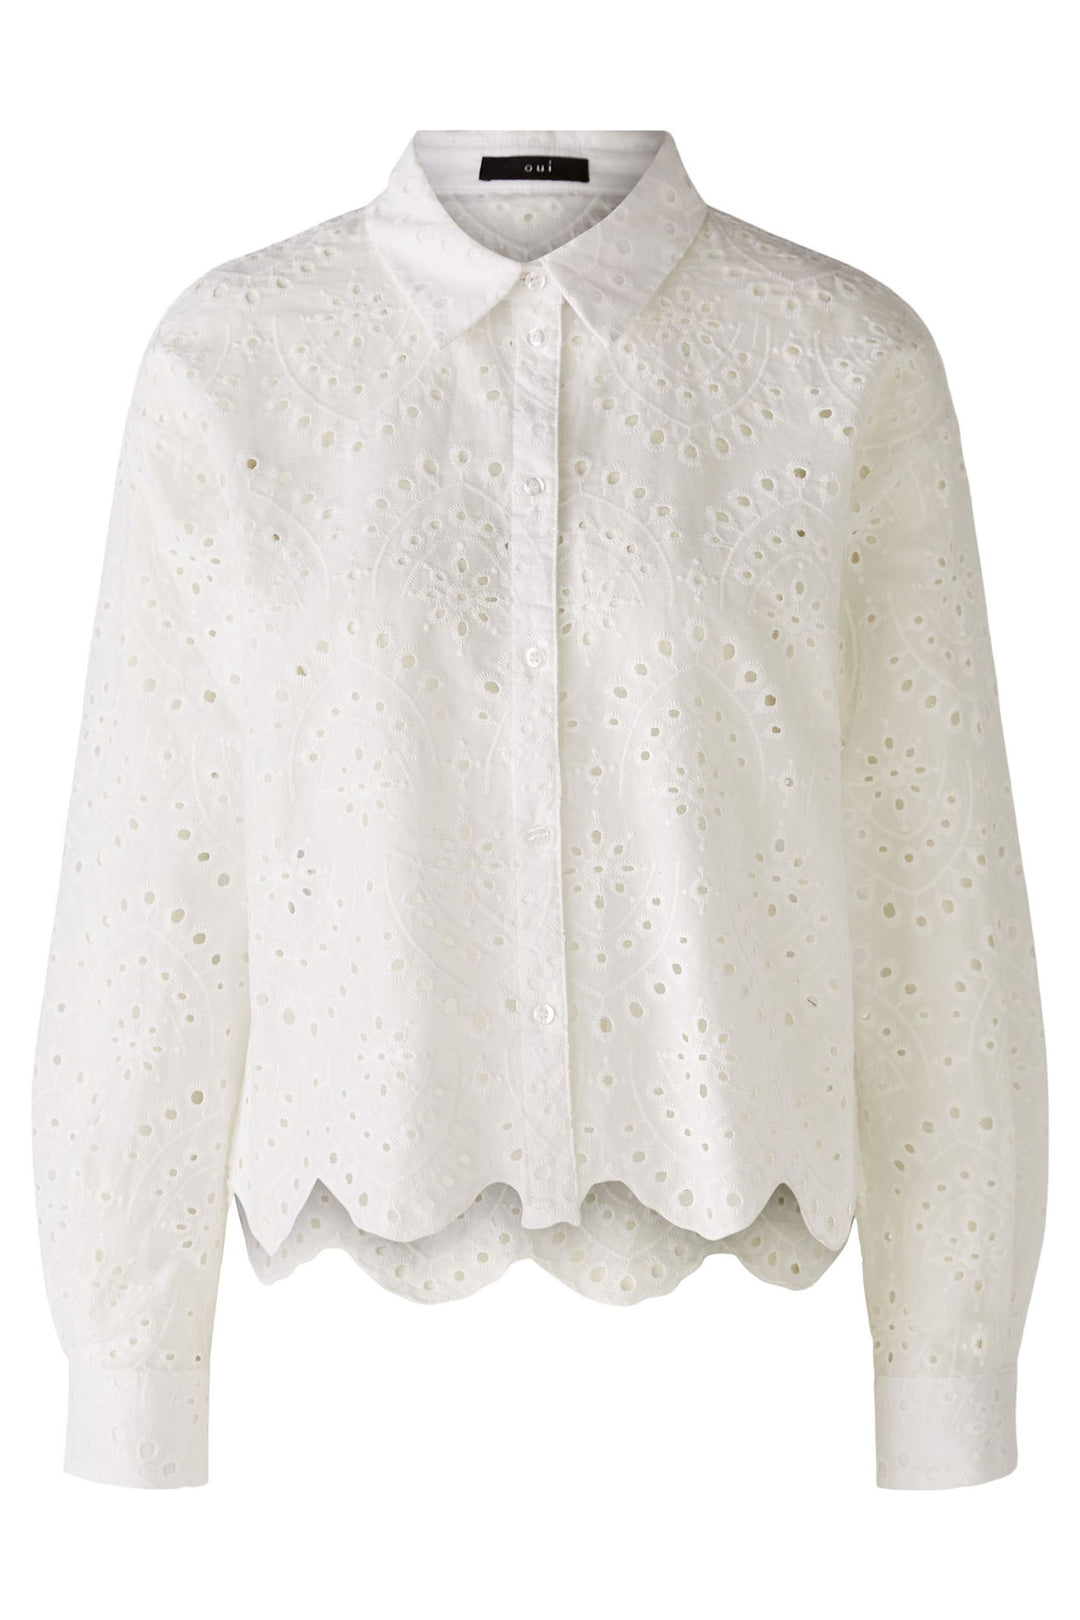 Oui 86772 Cloud Dancer White Broderie Anglaise Blouse - Shirley Allum Boutique